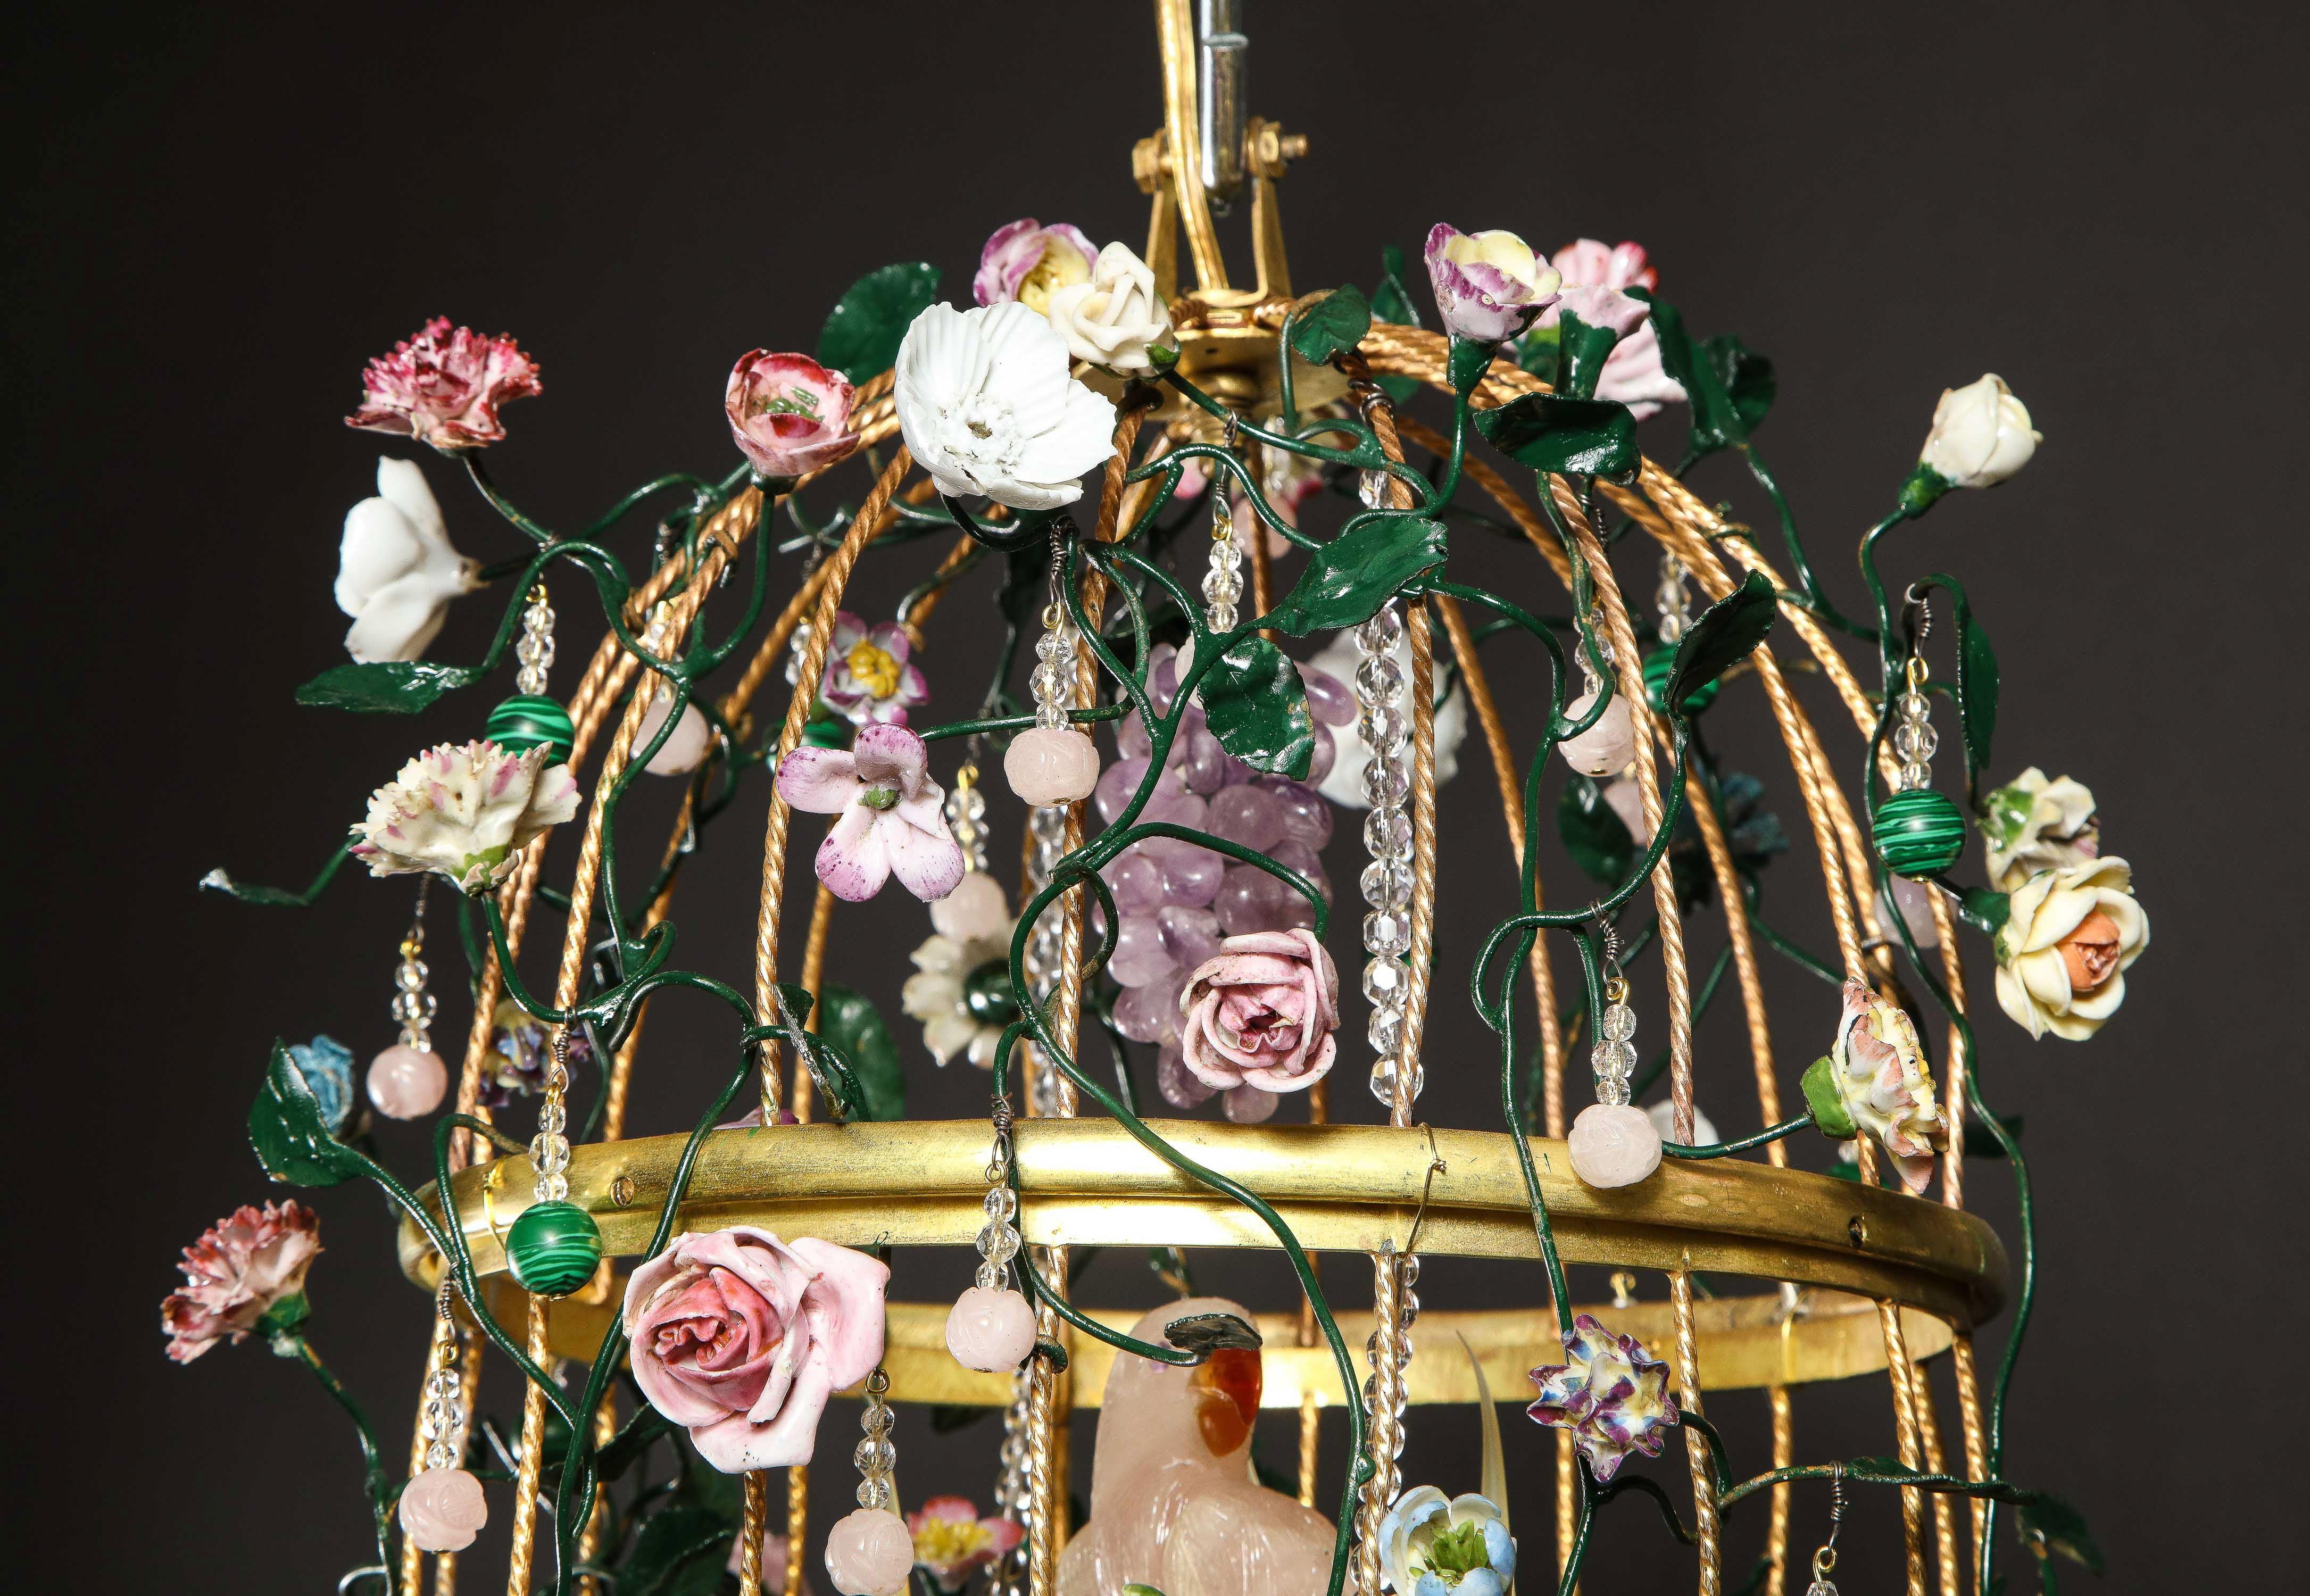 Birdcage Chandelier w/ 2 Rock Crystal Birds Perched Inside W/ Porcelain Flowers In Good Condition For Sale In New York, NY